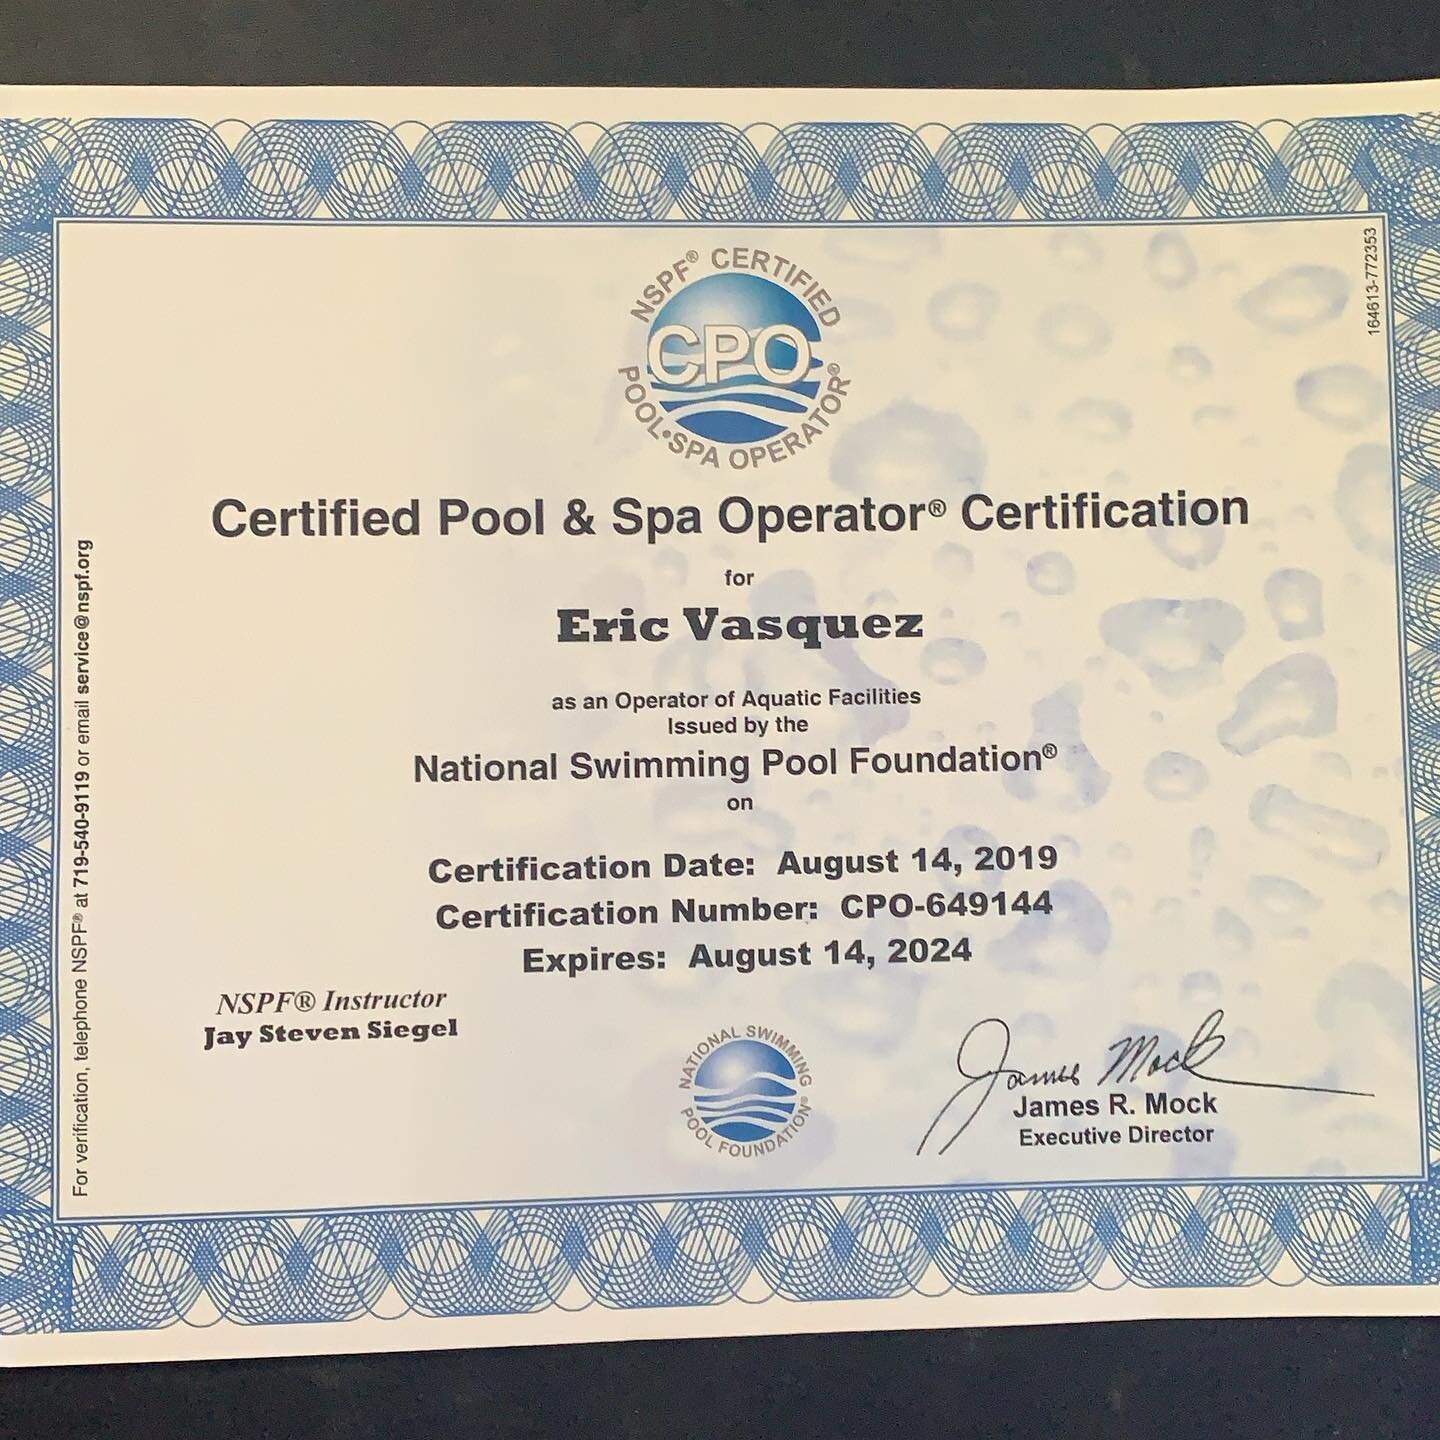 ** We might be your pool guys** 
** But really we are your Certified Pool Operators**

Proud to keep your pool perfect and serve our city!

CERTIFIED POOL SERVICE LLC.

We are pool professionals. Why trust you $30,000 ++ investment with an amateur wh